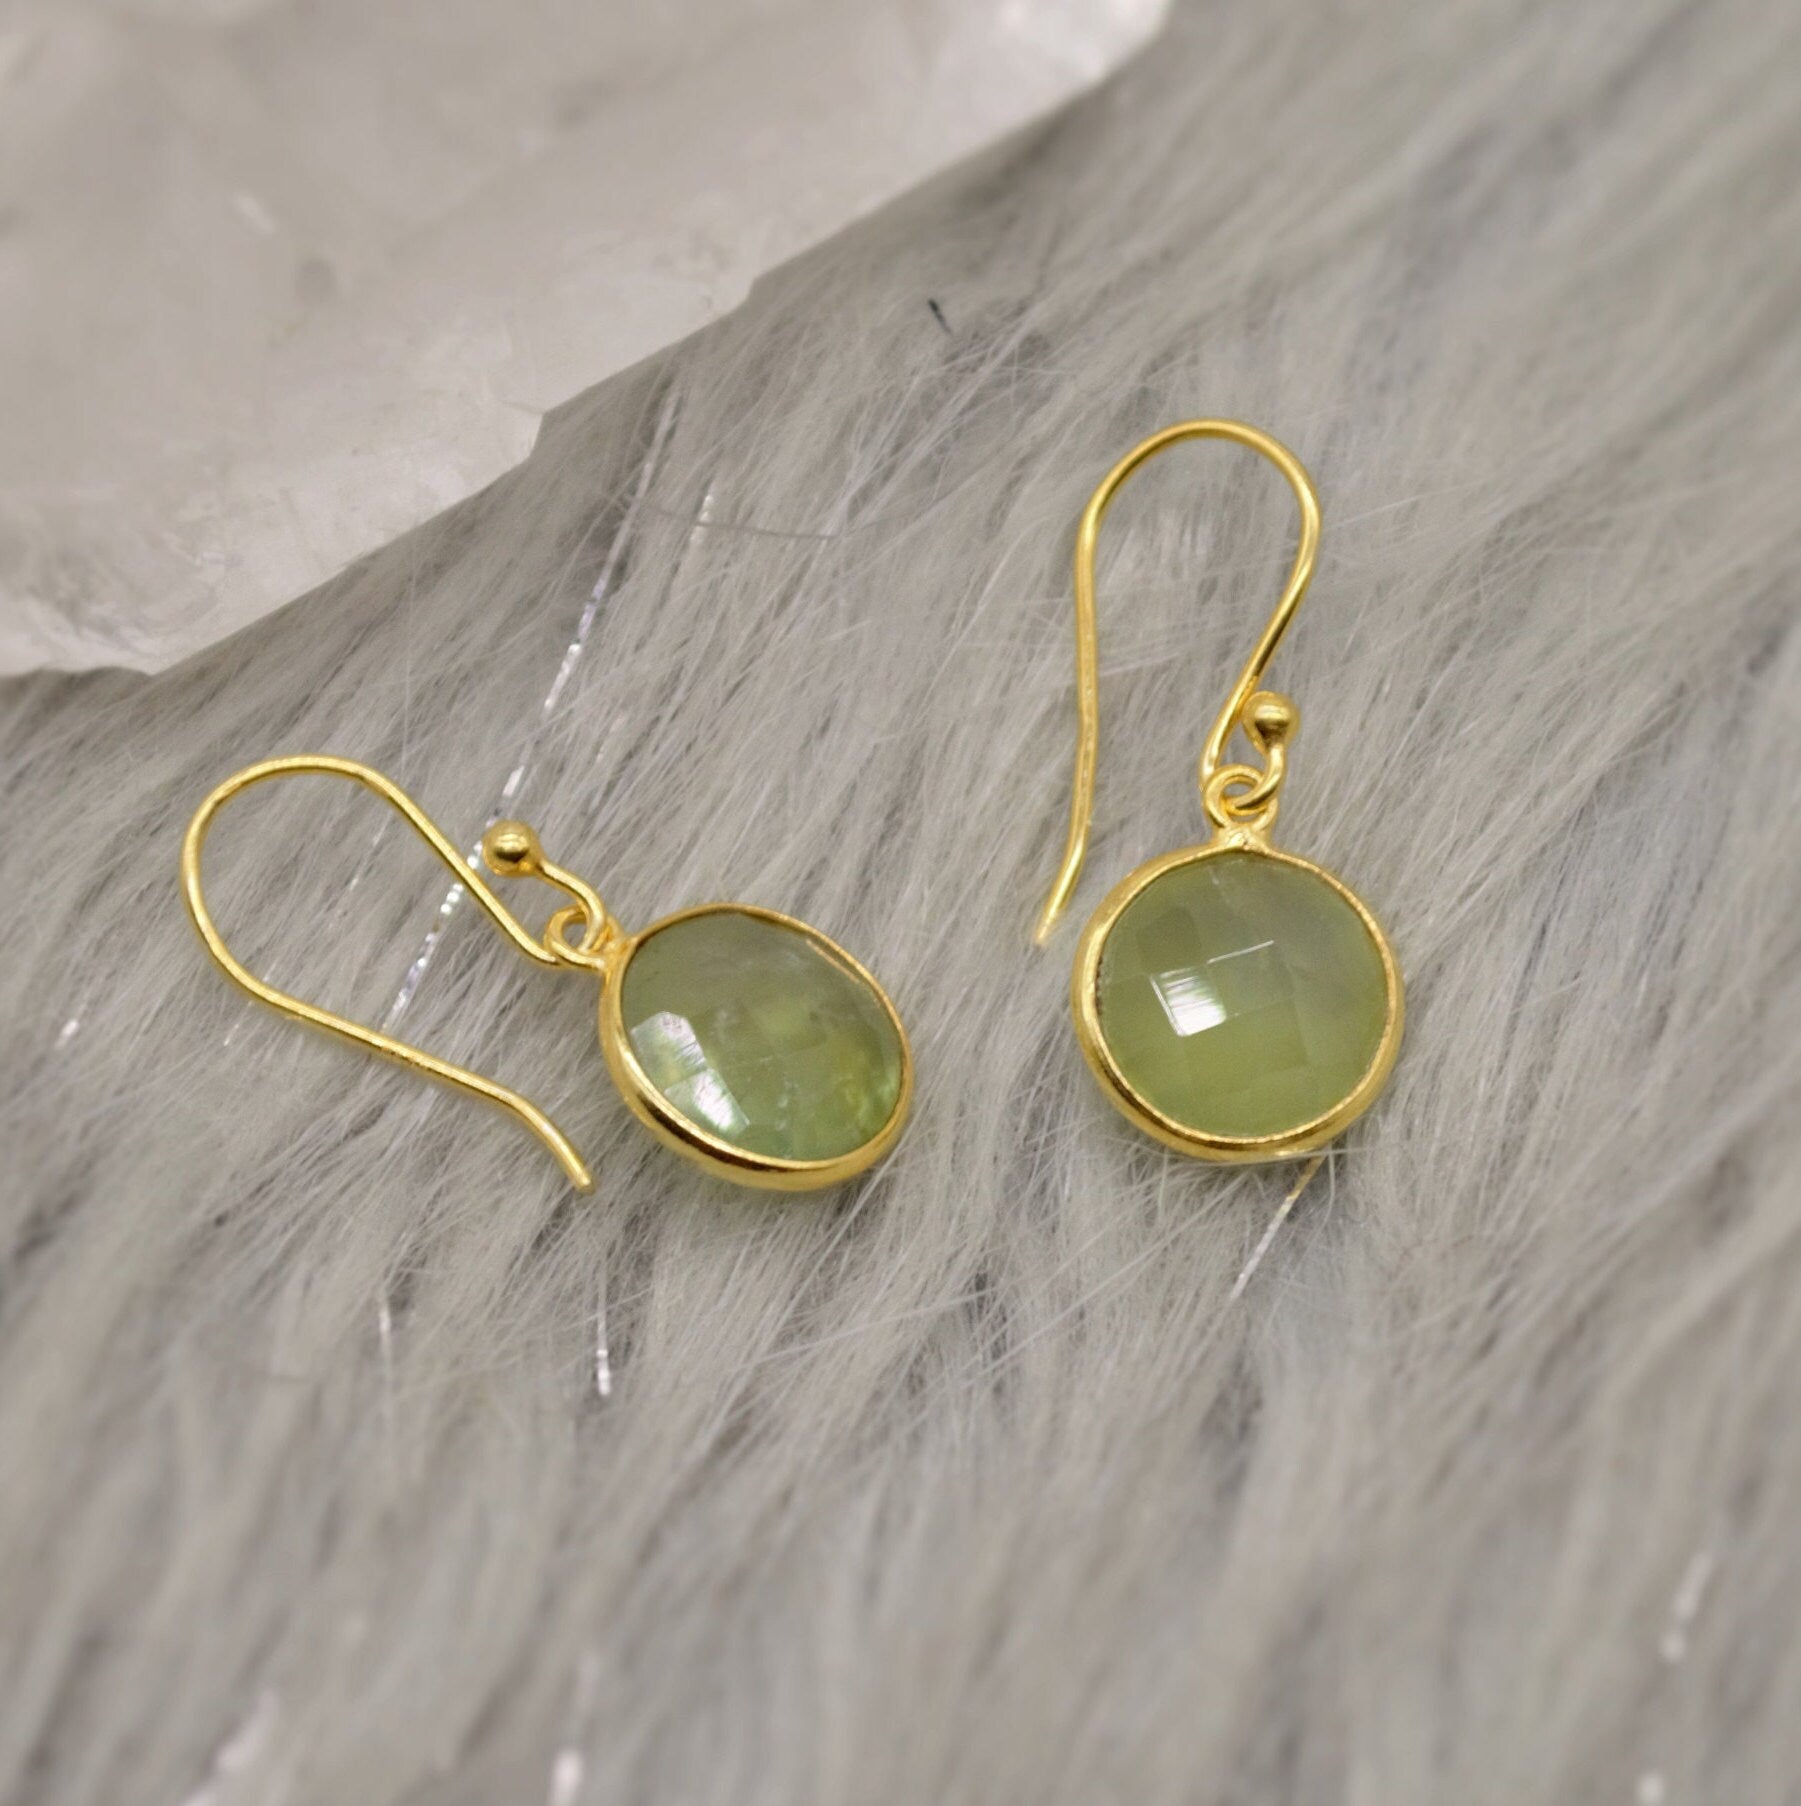 Prehnite Gold Earrings, Gold Plated Sterling Silver Gemstone Earrings, Unique Dangle Drop Earrings, Birthday Gifts For Her, Christmas Gifts